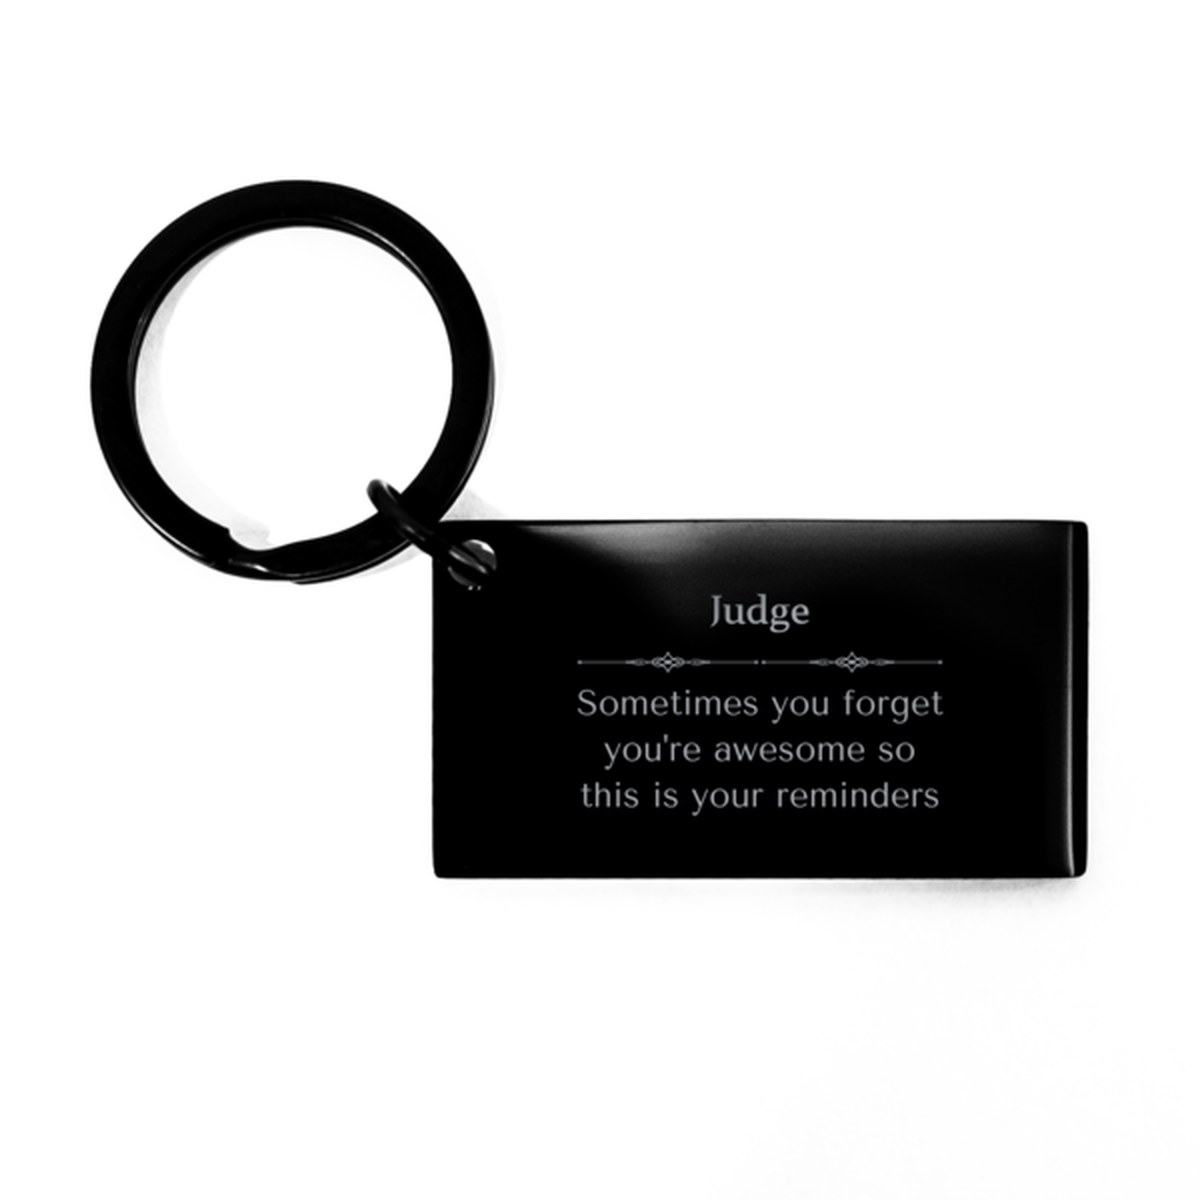 Sentimental Judge Keychain, Music Teacher Sometimes you forget you're awesome so this is your reminders, Graduation Christmas Birthday Gifts for Judge, Men, Women, Coworkers